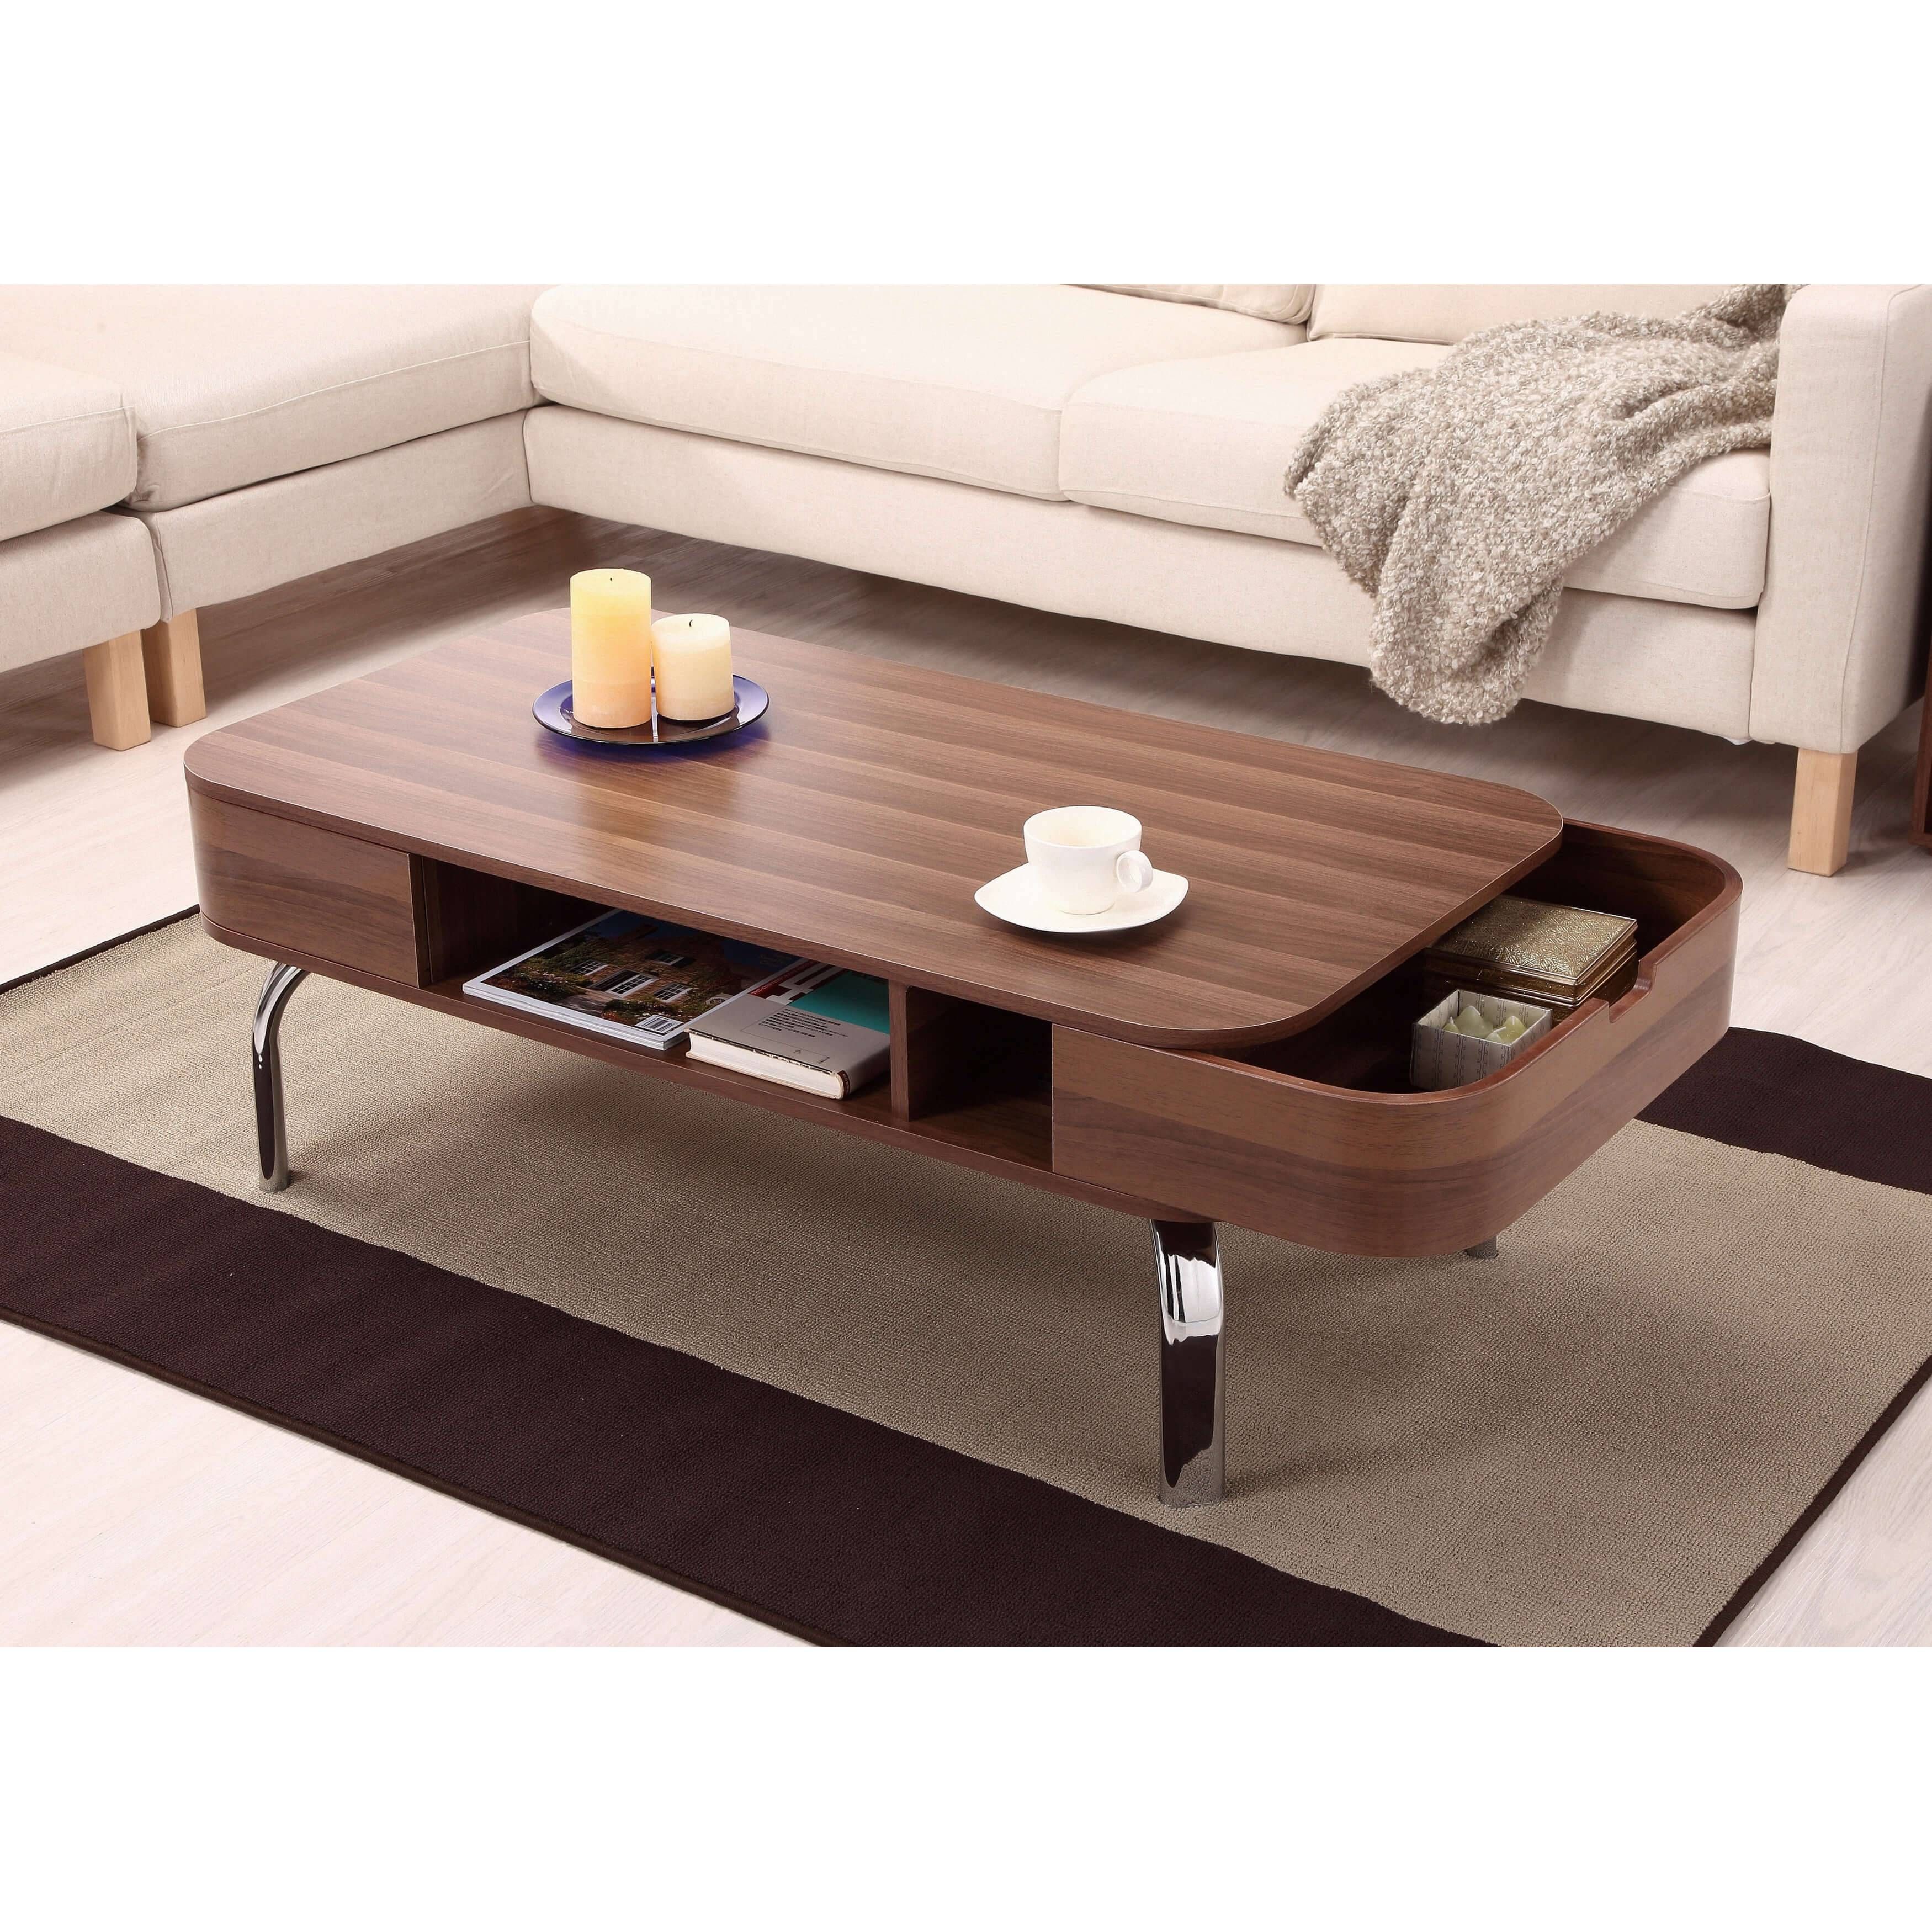 Modern Coffee Table Contemporary Wooden Coffee Tables Brown Finish With Regard To Oval Shaped Coffee Tables (View 23 of 30)